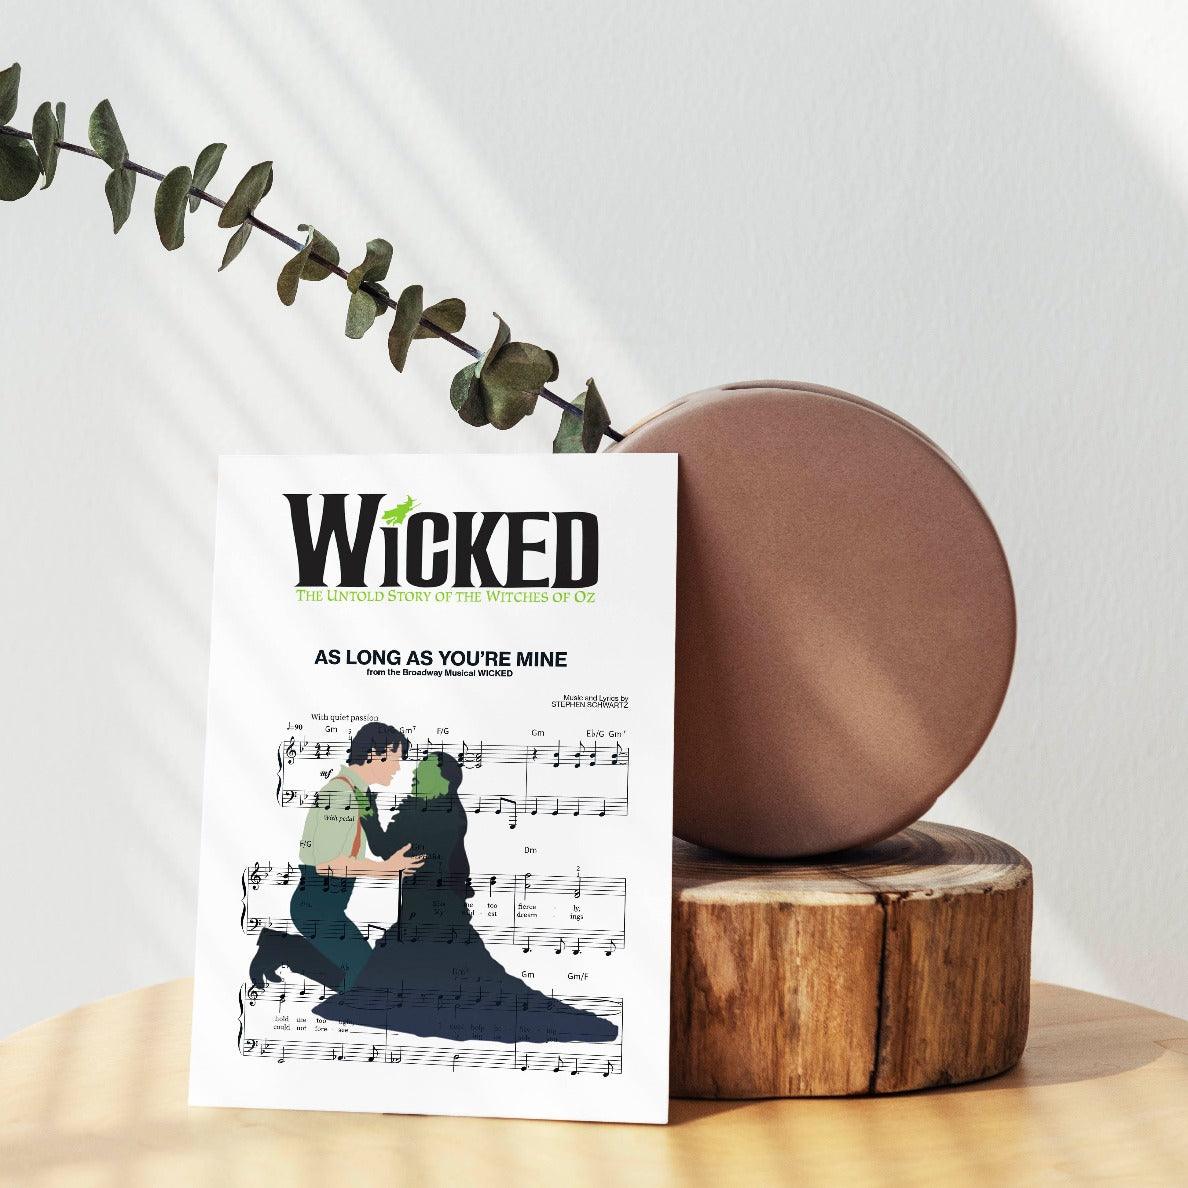 If you're a fan of the show Wicked then you're going to love this poster! This bright and colorful poster was designed and printed in the UK. It features the song lyrics to "As Long As You're Mine" from the musical Wicked. It would look great in any room, and would make a perfect addition to your Wicked collection.